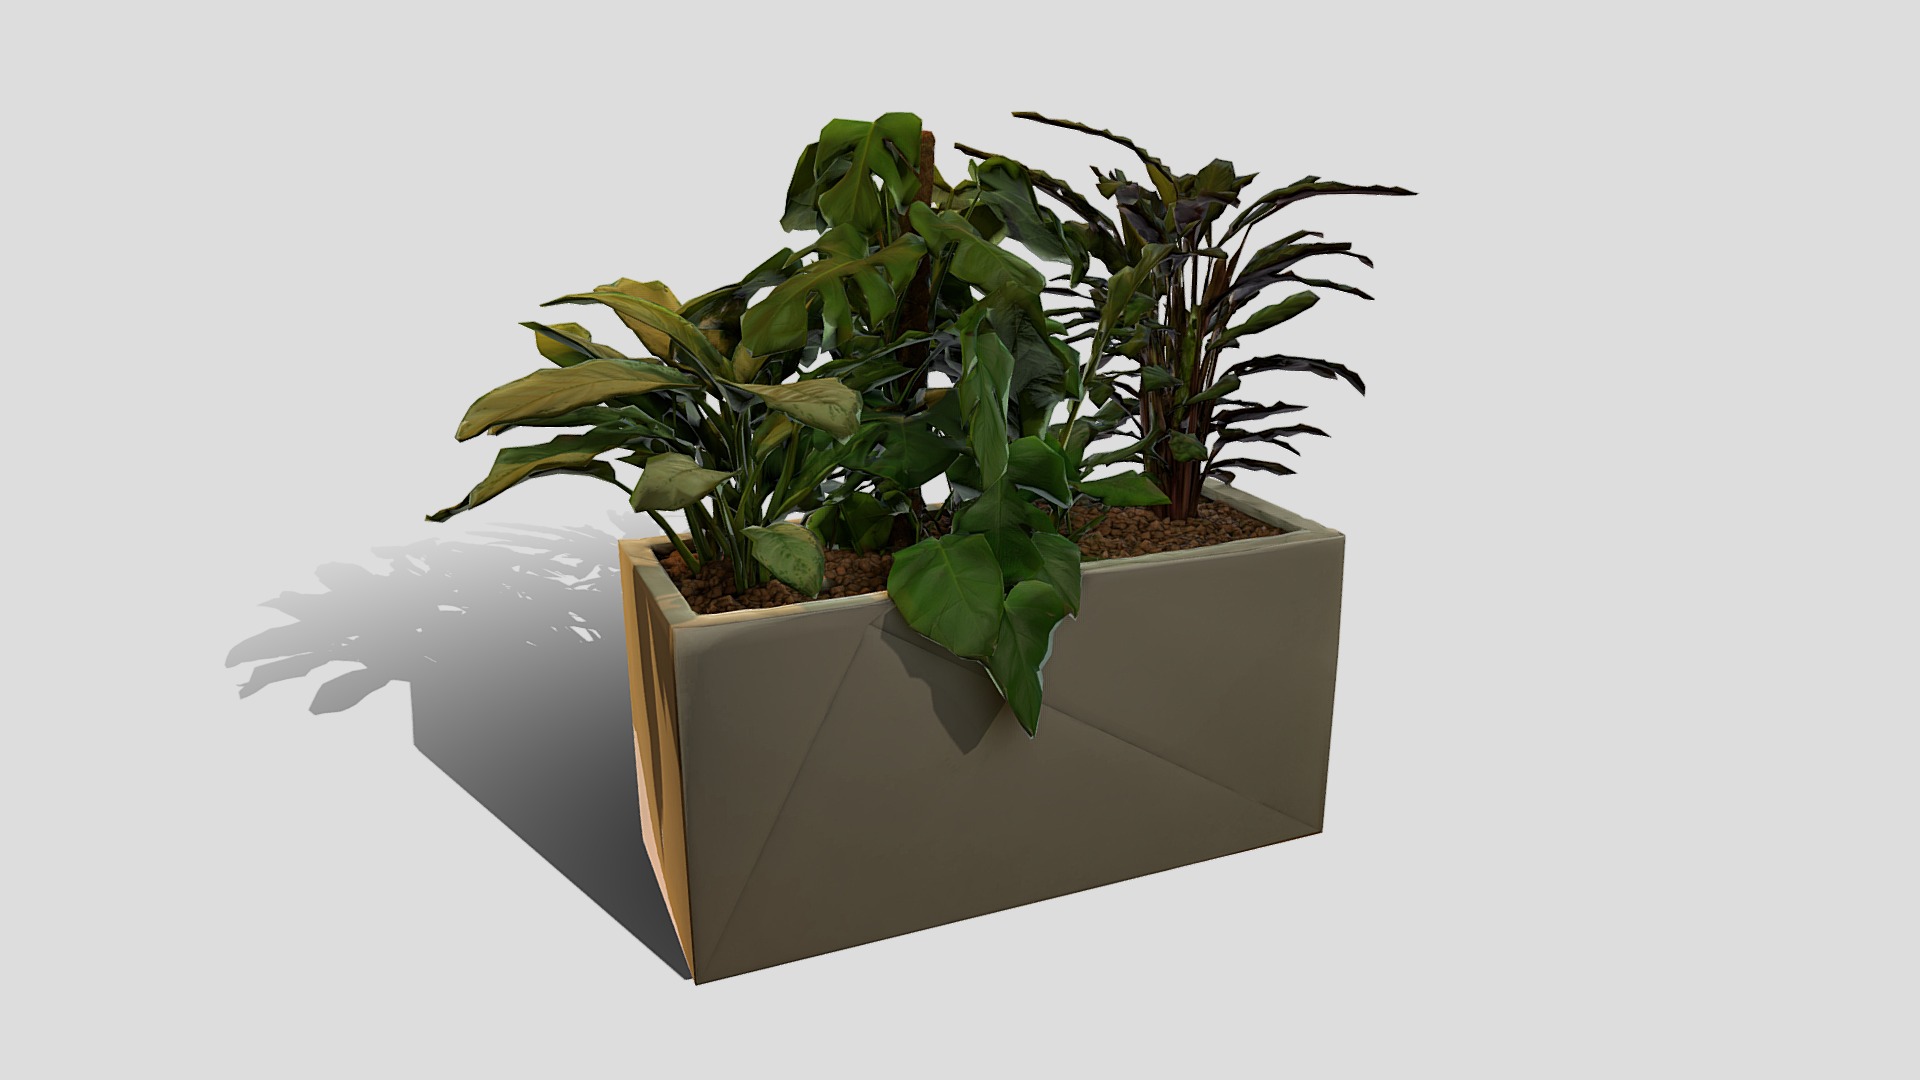 3D model Plant 6 - This is a 3D model of the Plant 6. The 3D model is about a plant in a box.